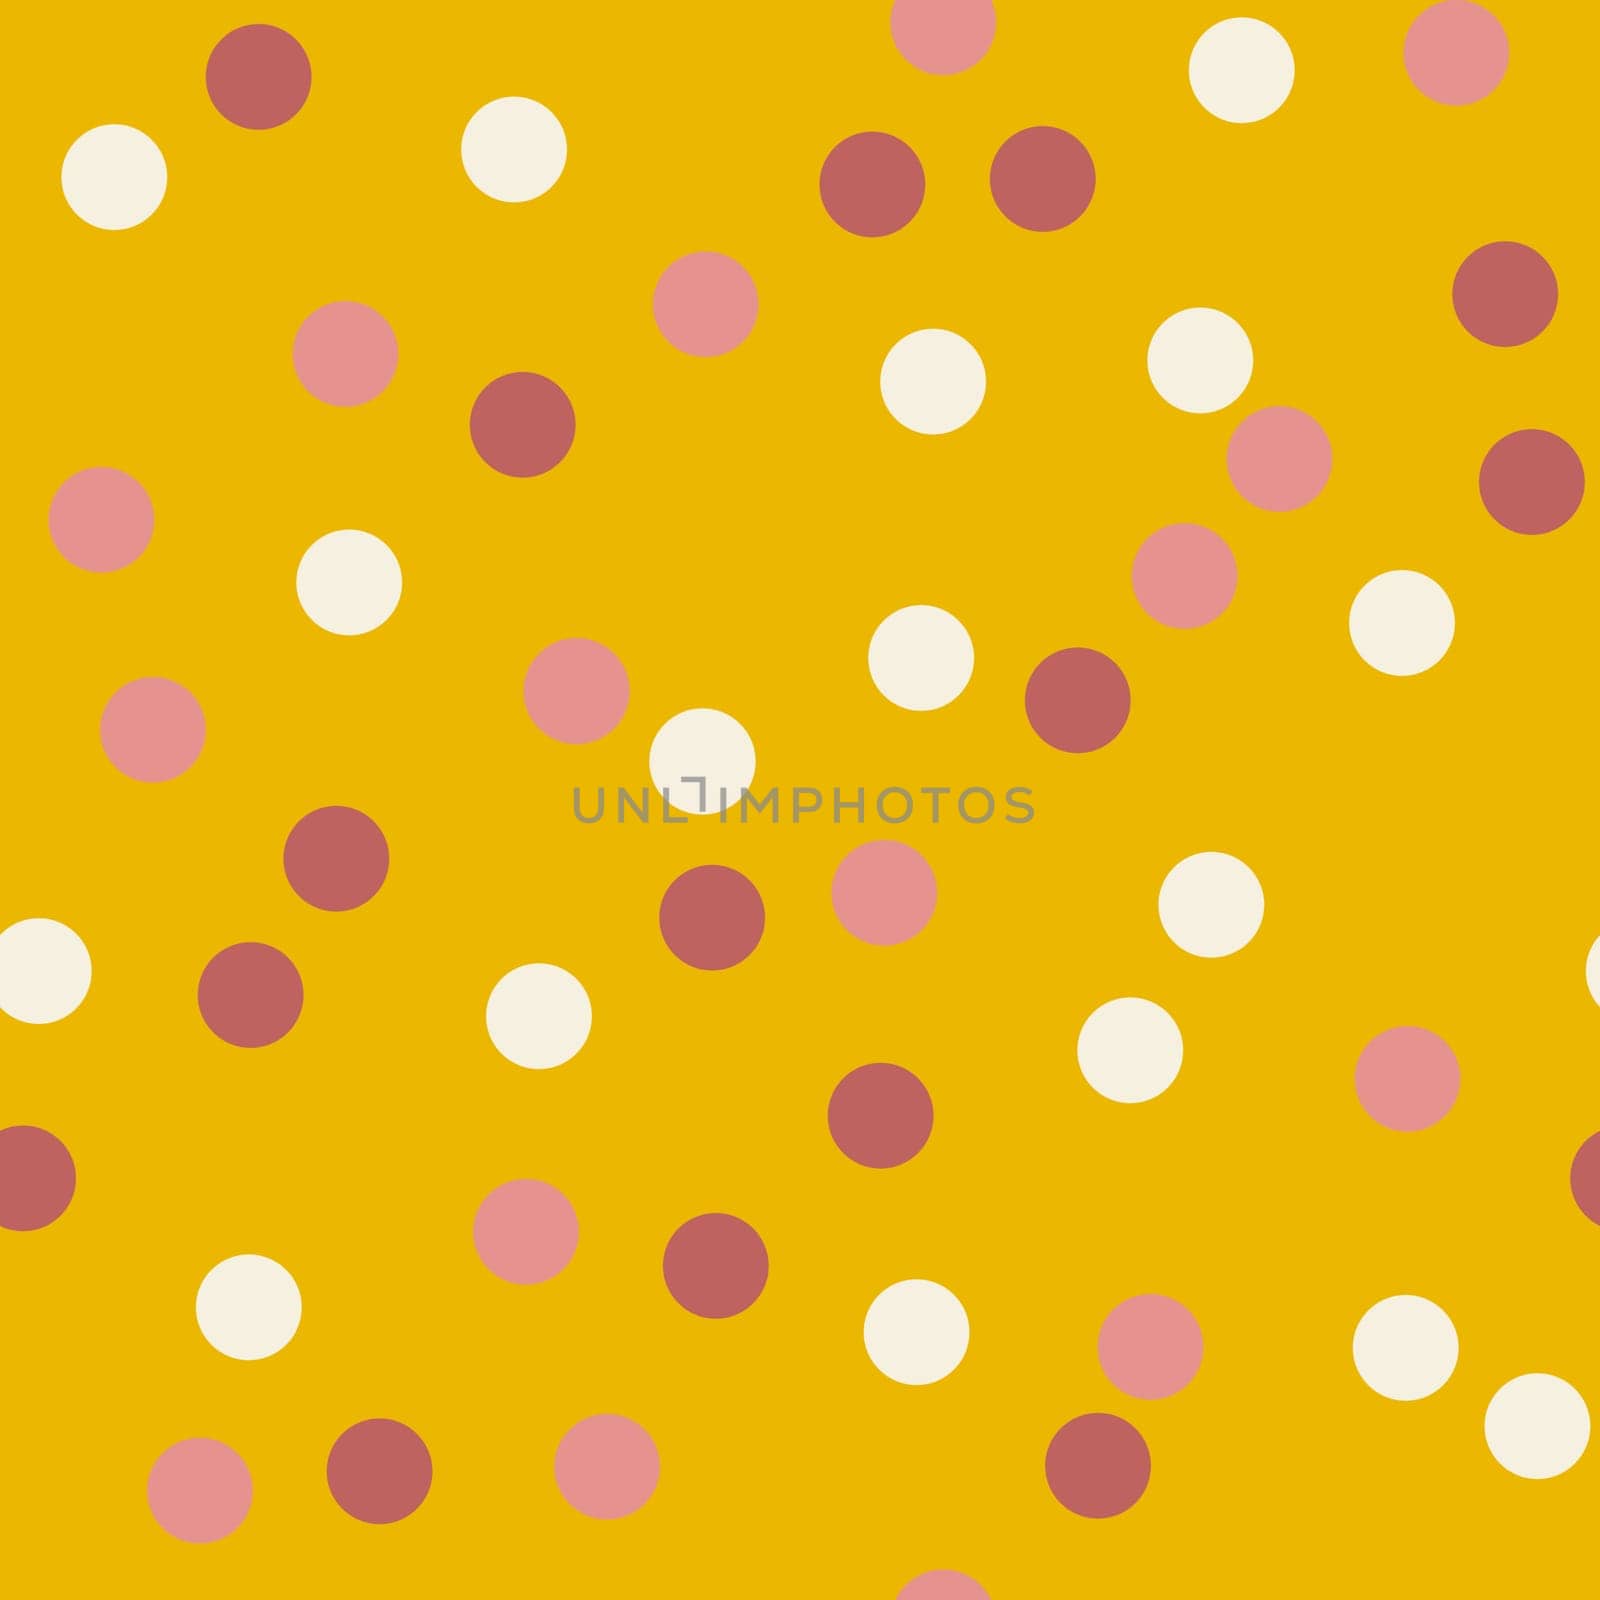 Hand drawn seamless pattern with beige marsala geometric circles on vintage yellow. Large abstract polka dot round shapes, minimalist mid century modern style, neutral retro vintage style, fashion fabric wrapping. by Lagmar